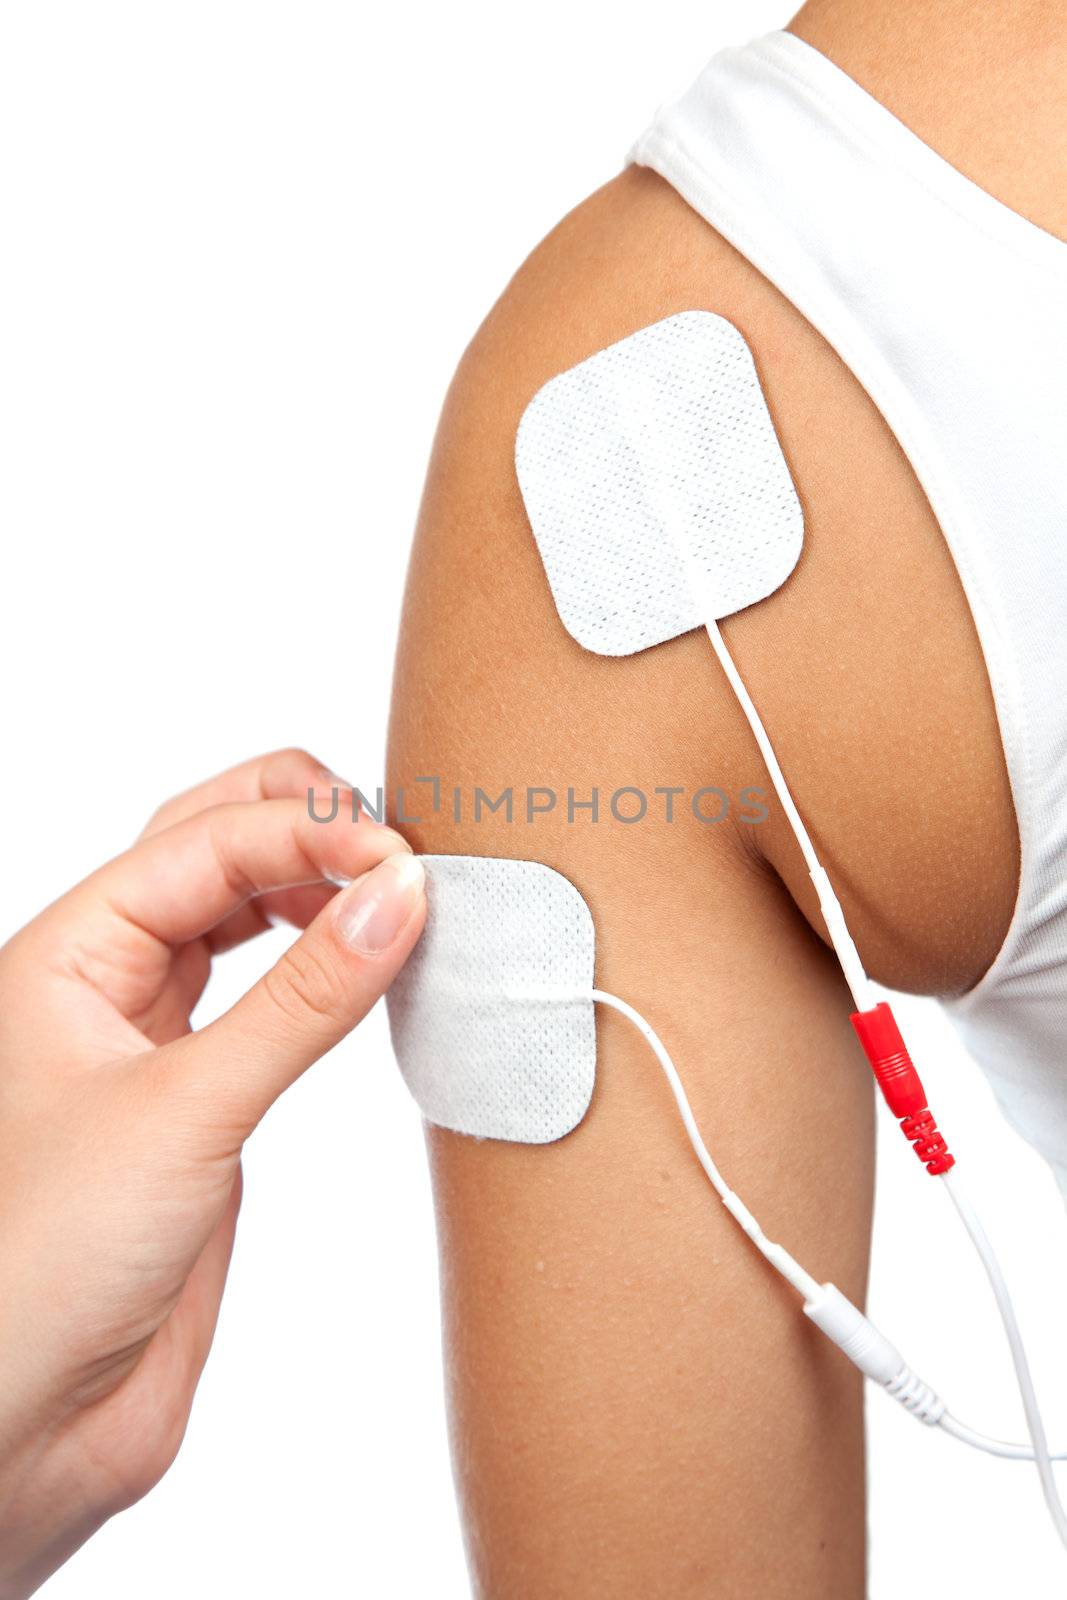 electrodes of tens device on shoulder, tens therapy, nerve stimulation